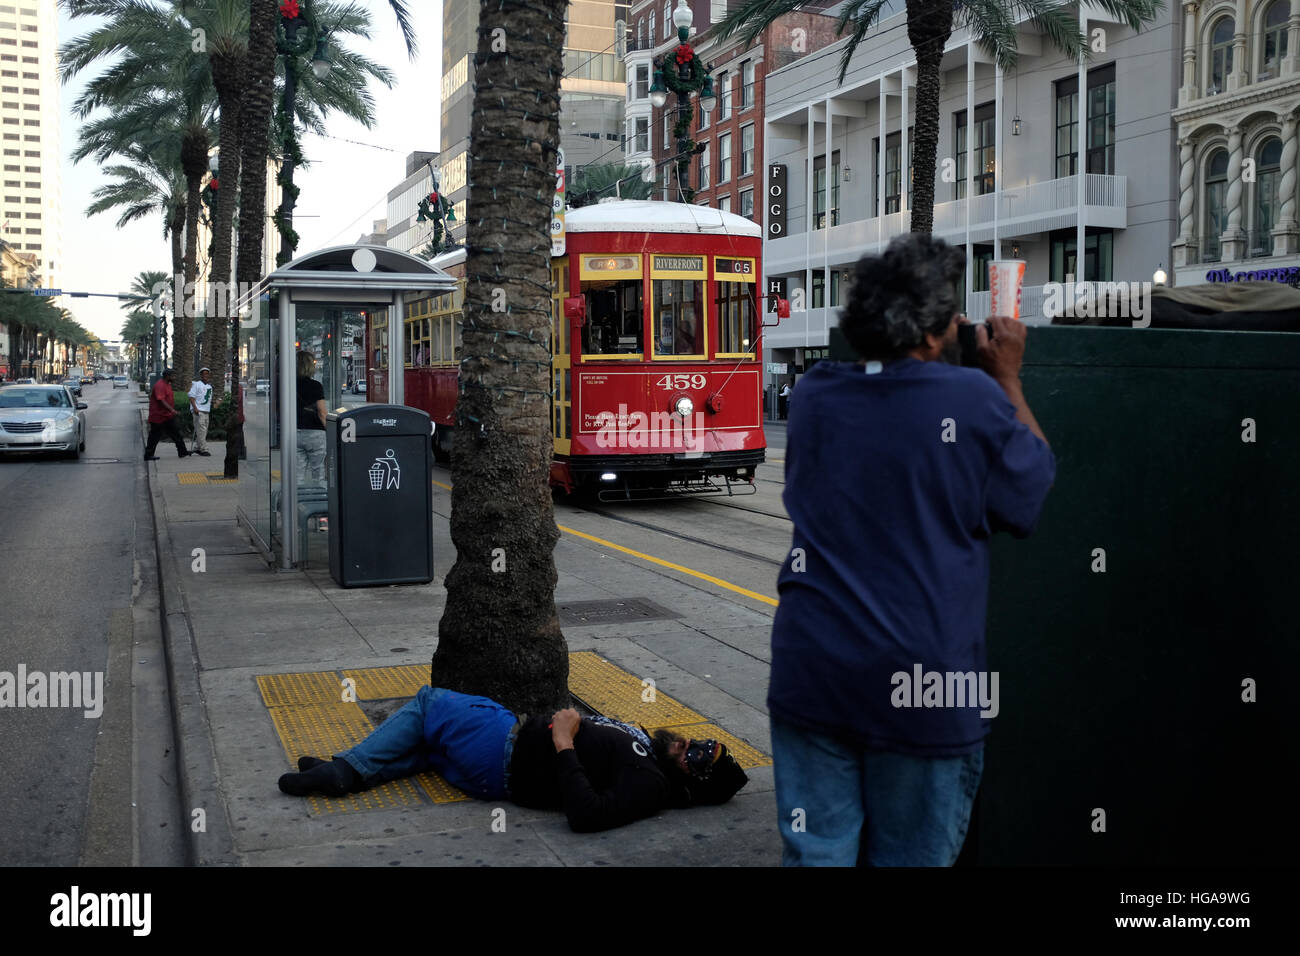 NEW ORLEANS, LA: Two homeless men loiter on Canal Street in the French Quarter as a streetcar approaches.  11/15/16 Stock Photo